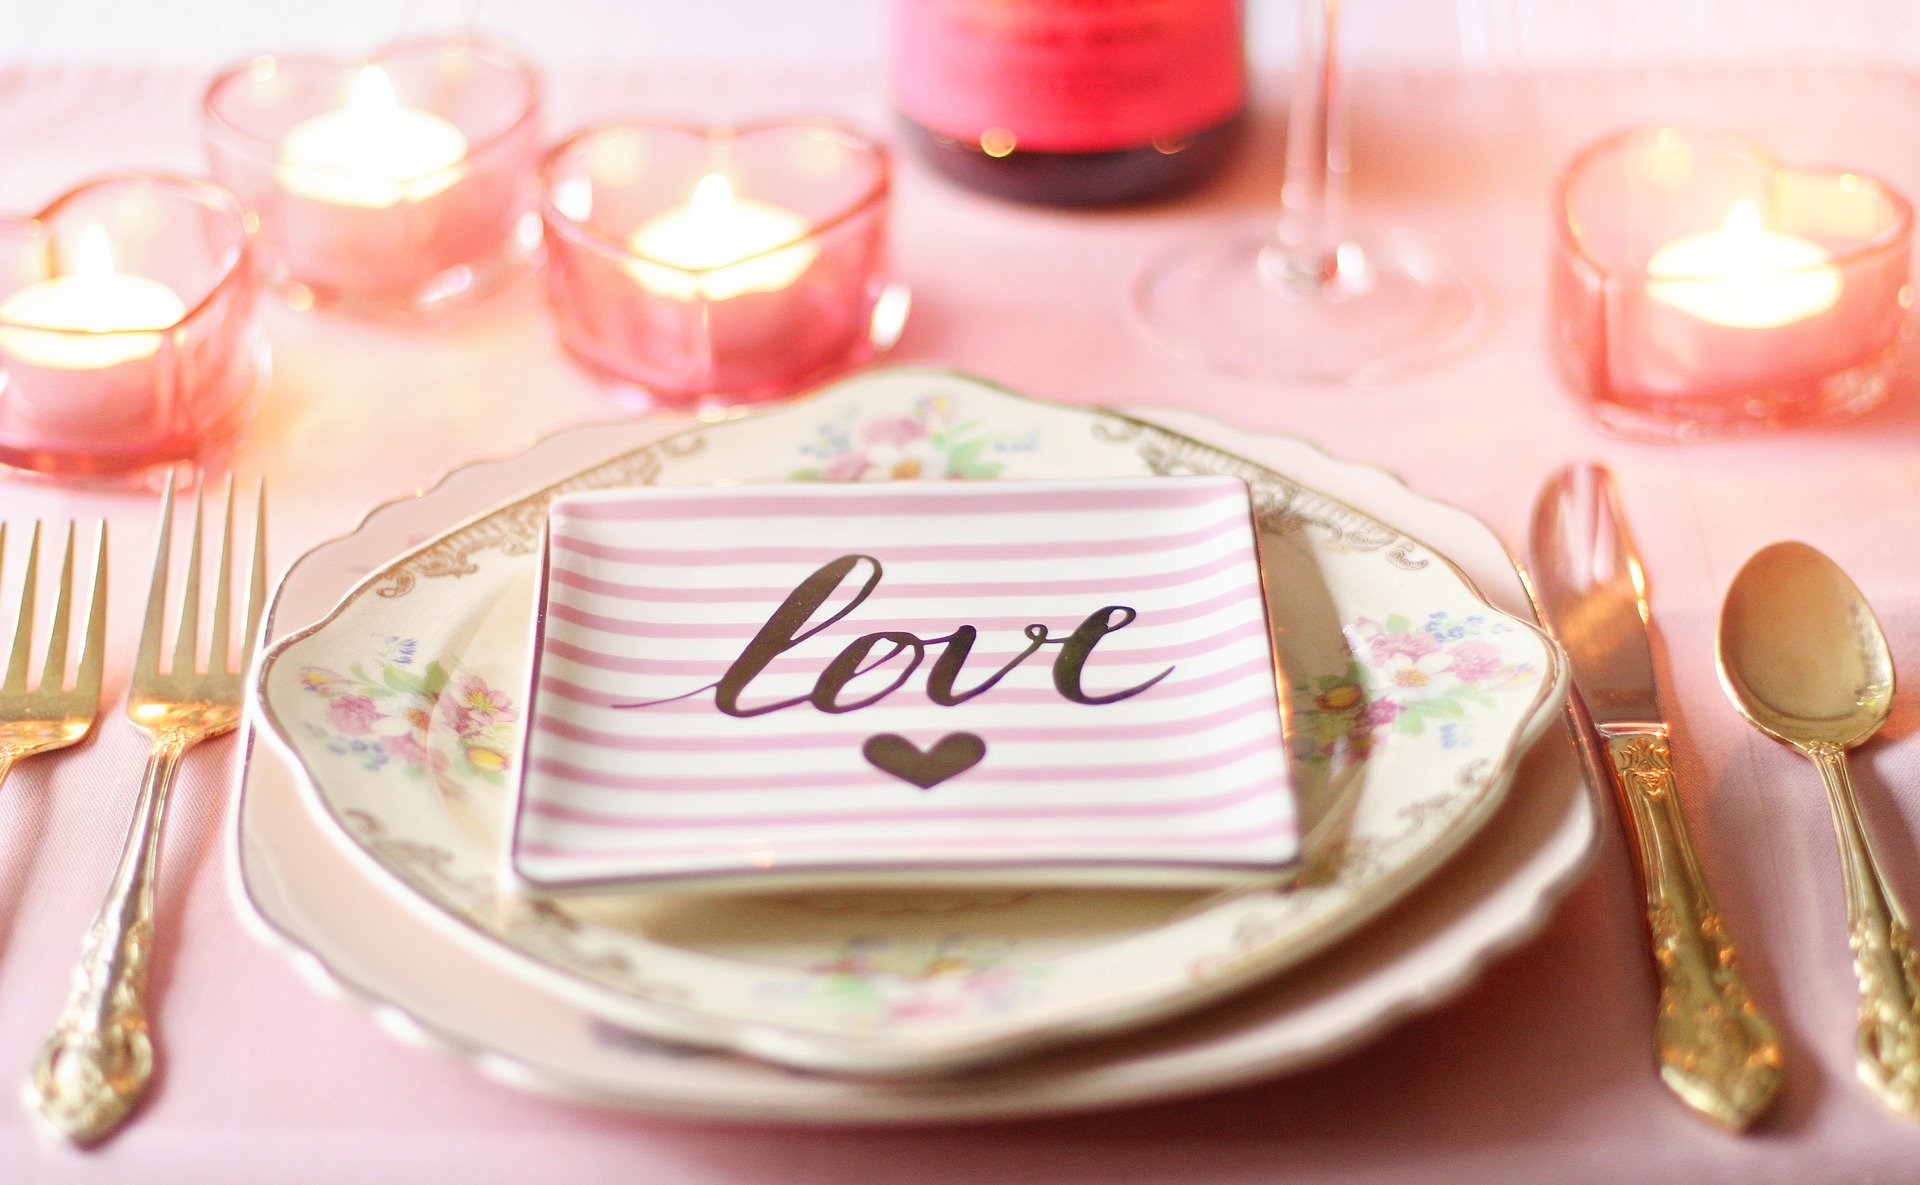 A table setting for Valentine's Day with gold crockery and floral plates. There is a pink and white plate with "Love" written on it with a heart.